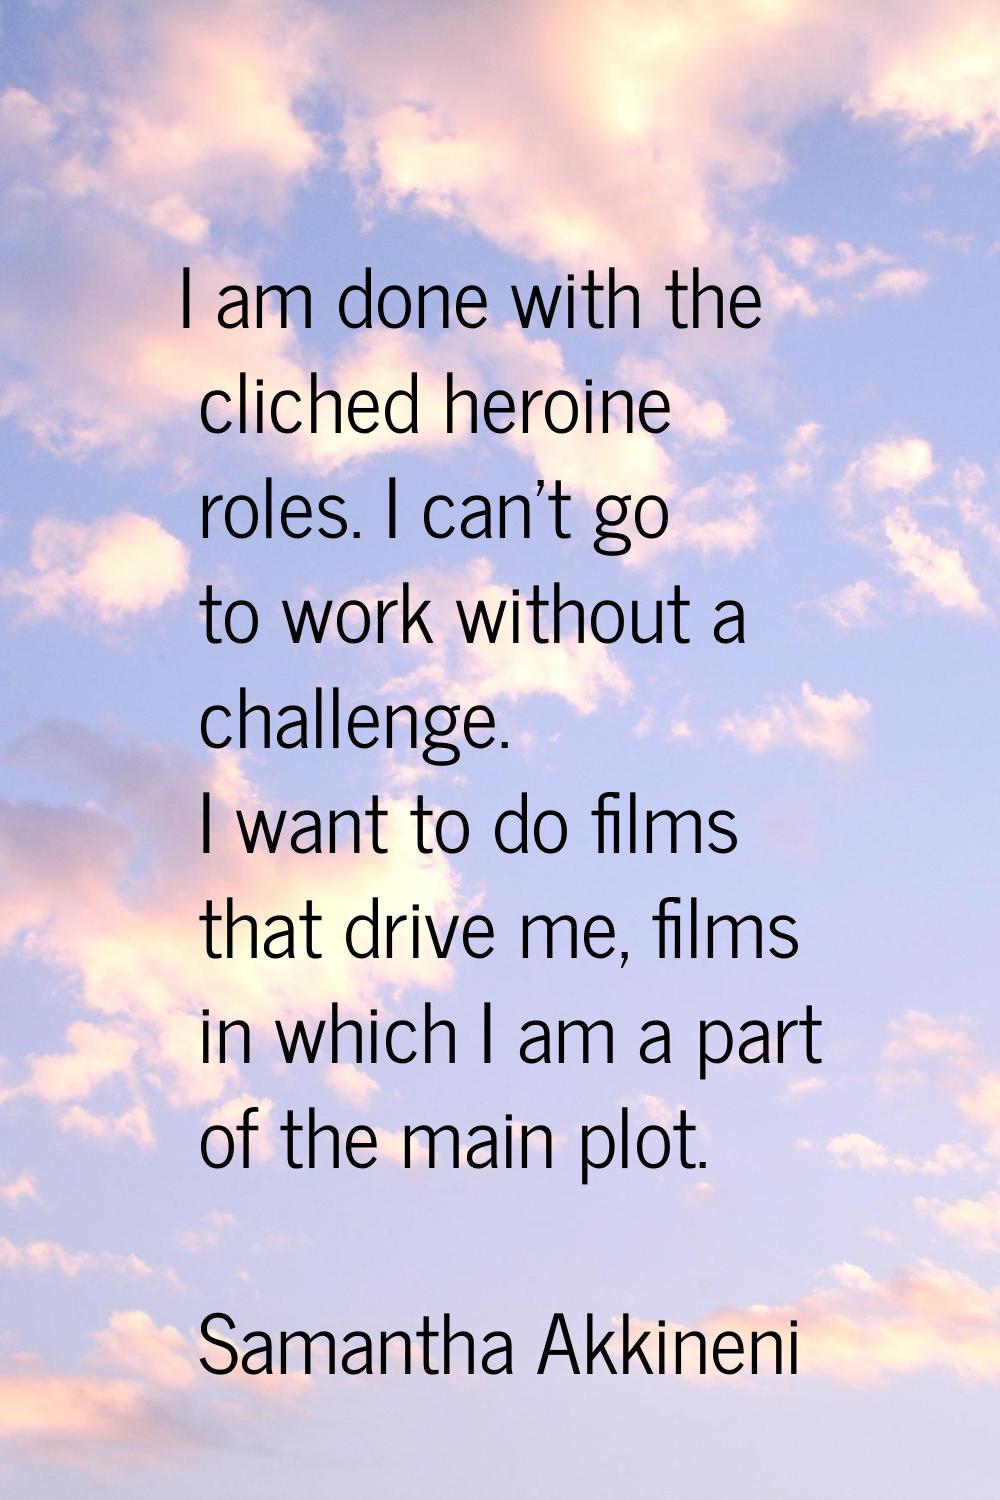 I am done with the cliched heroine roles. I can't go to work without a challenge. I want to do film